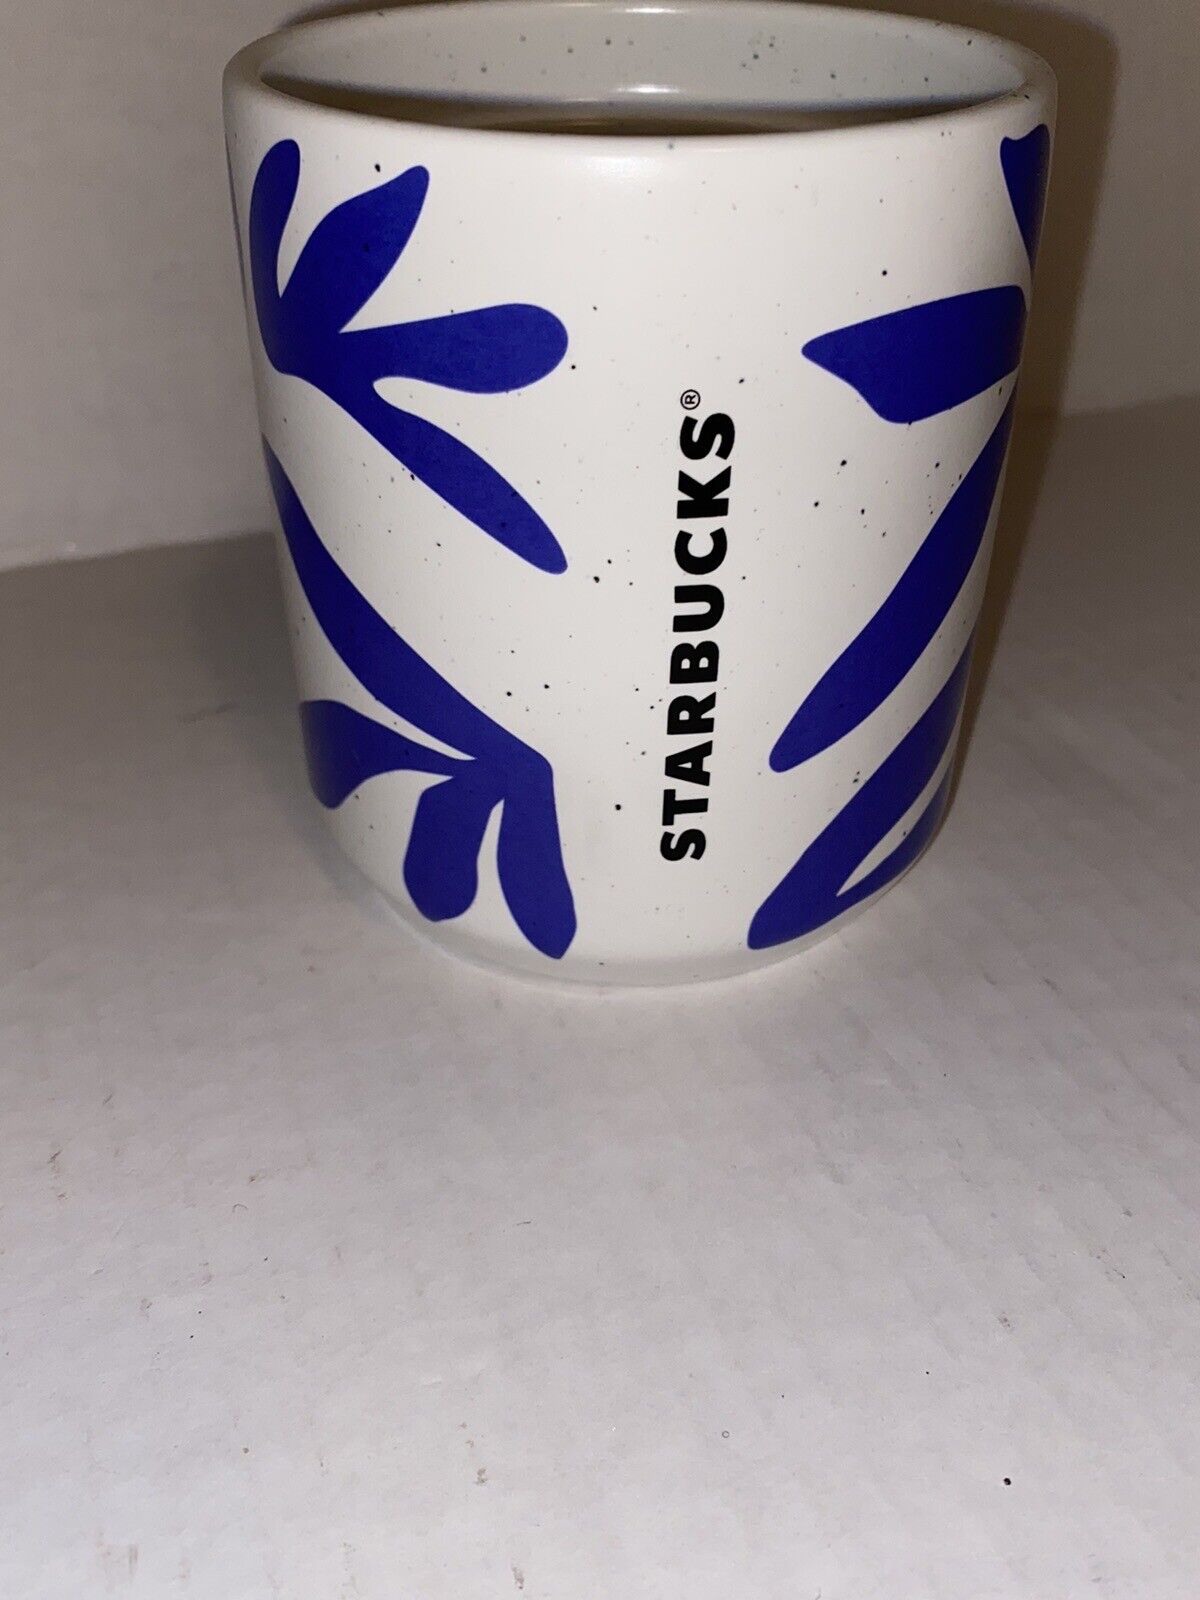 Starbucks Mother's Day 2021 Cup Floral White Blue No Yellow Lid Ceramic Cup Mug